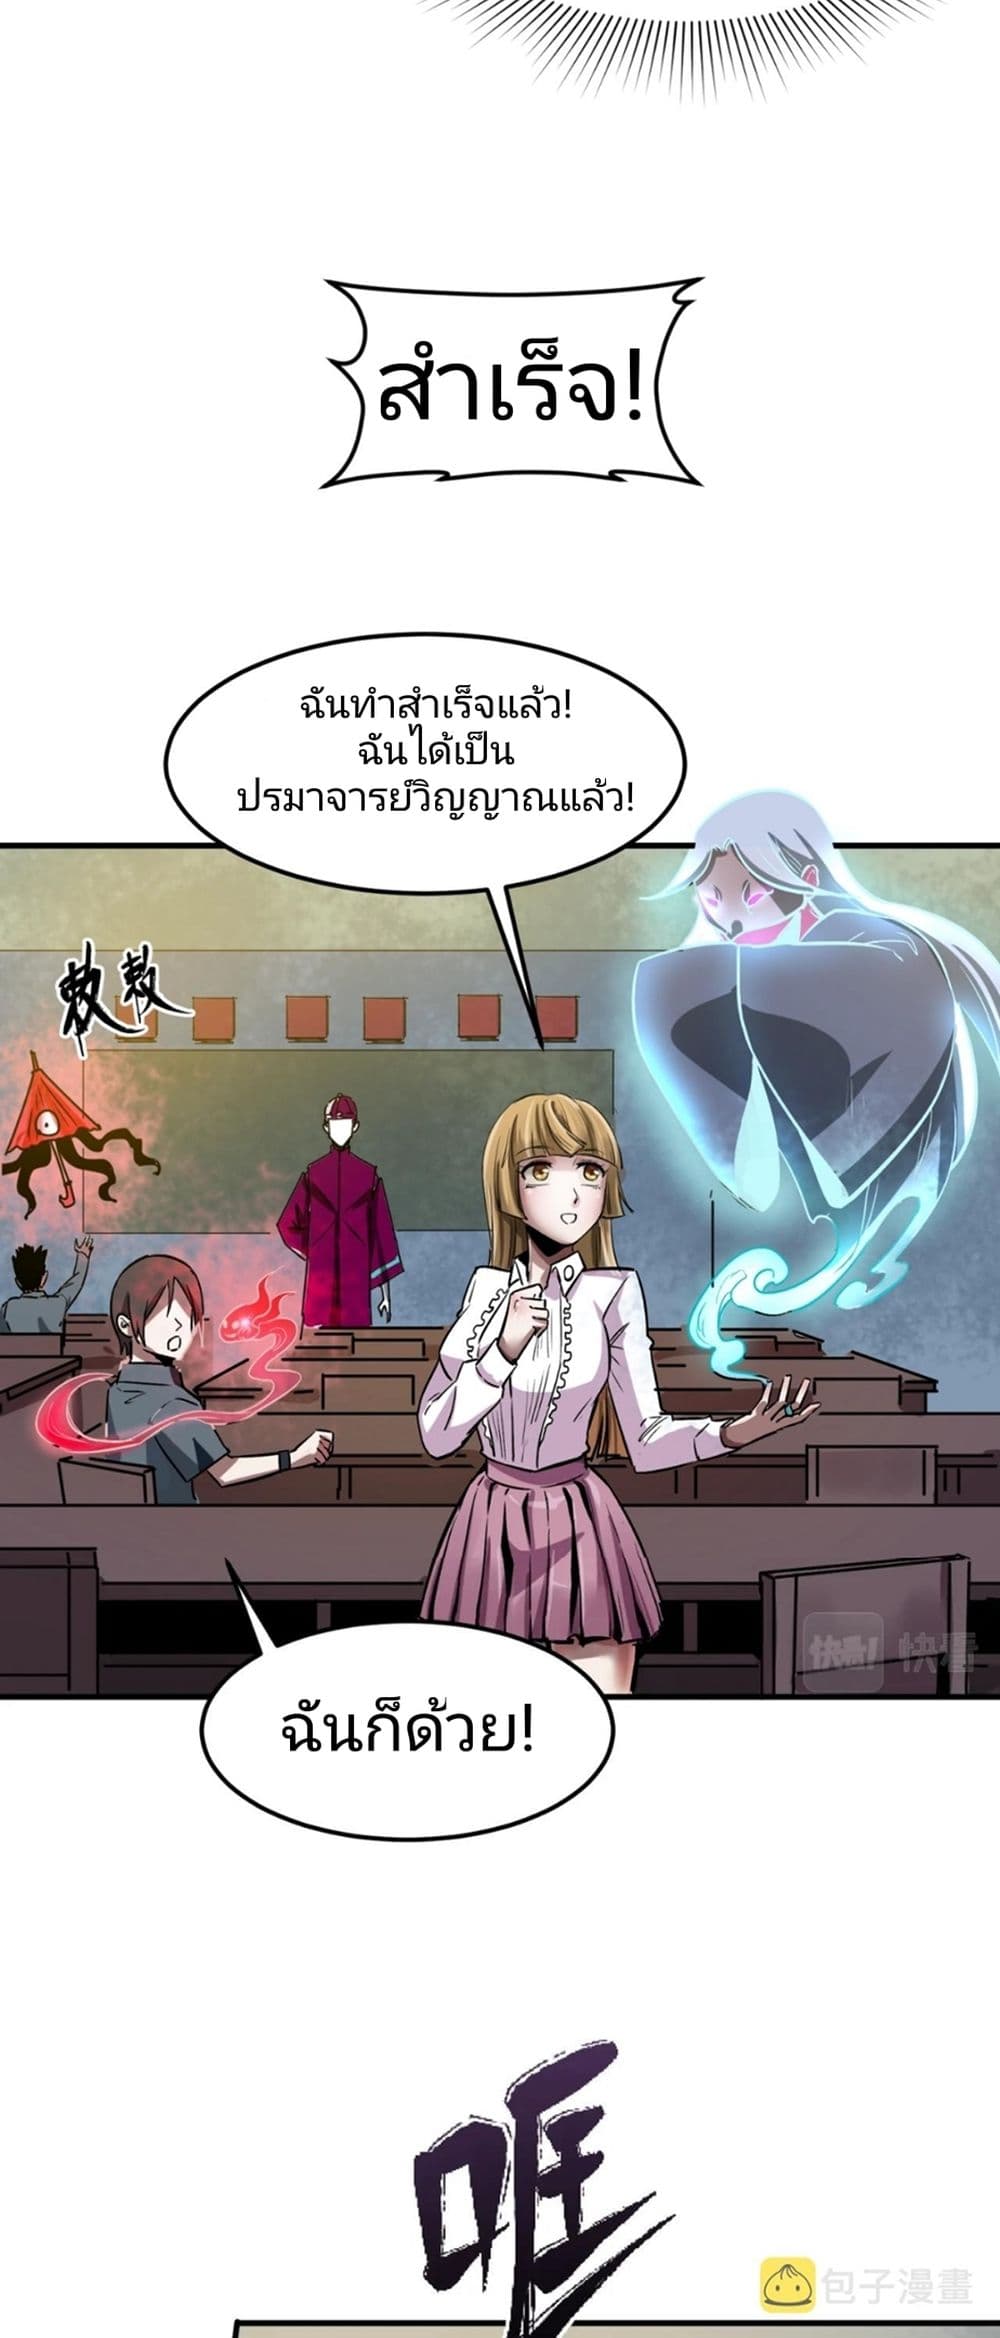 The Age of Ghost Spirits à¸à¸­à¸à¸à¸µà¹ 1 (40)